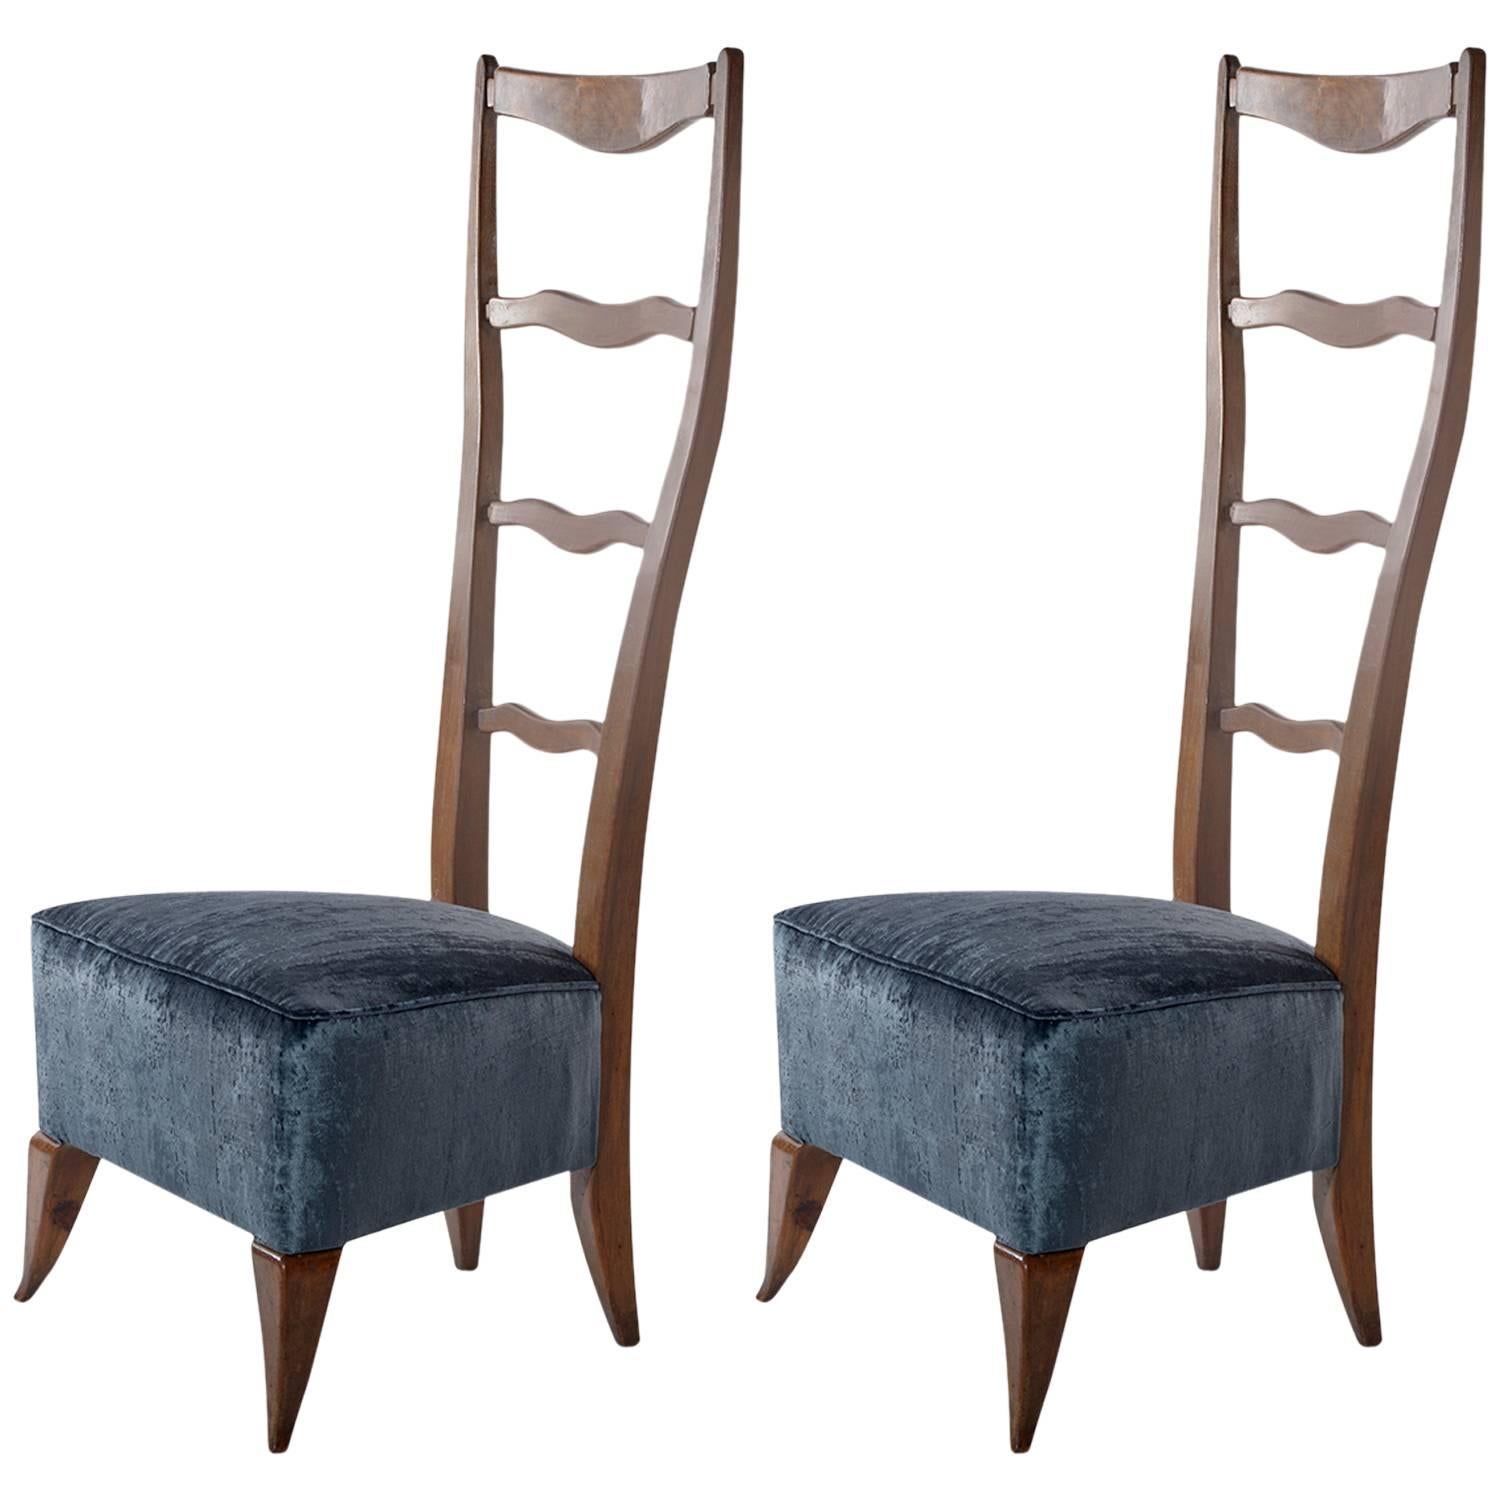 Pair of Hight-Back 1940 Chairs by Architect Italo Gamberini, Firenze For Sale